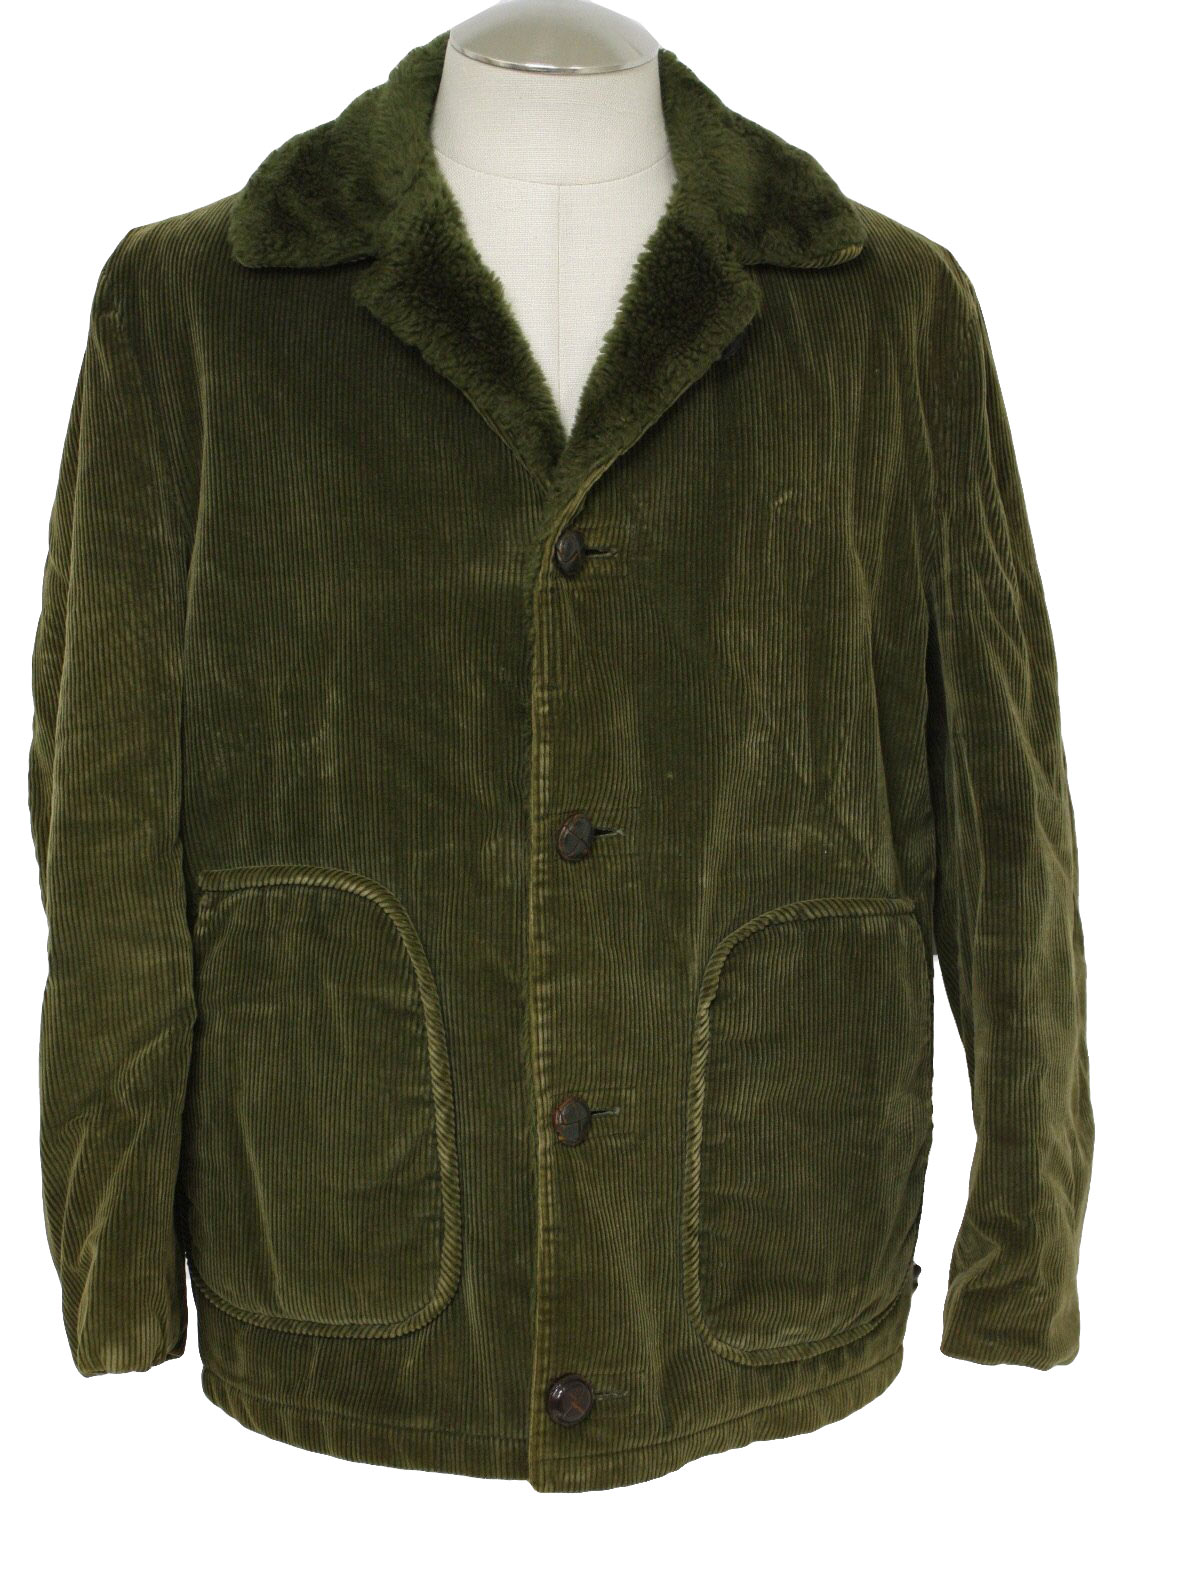 1970's Vintage Towncraft Jacket: Early 70s -Towncraft- Mens olive green ...